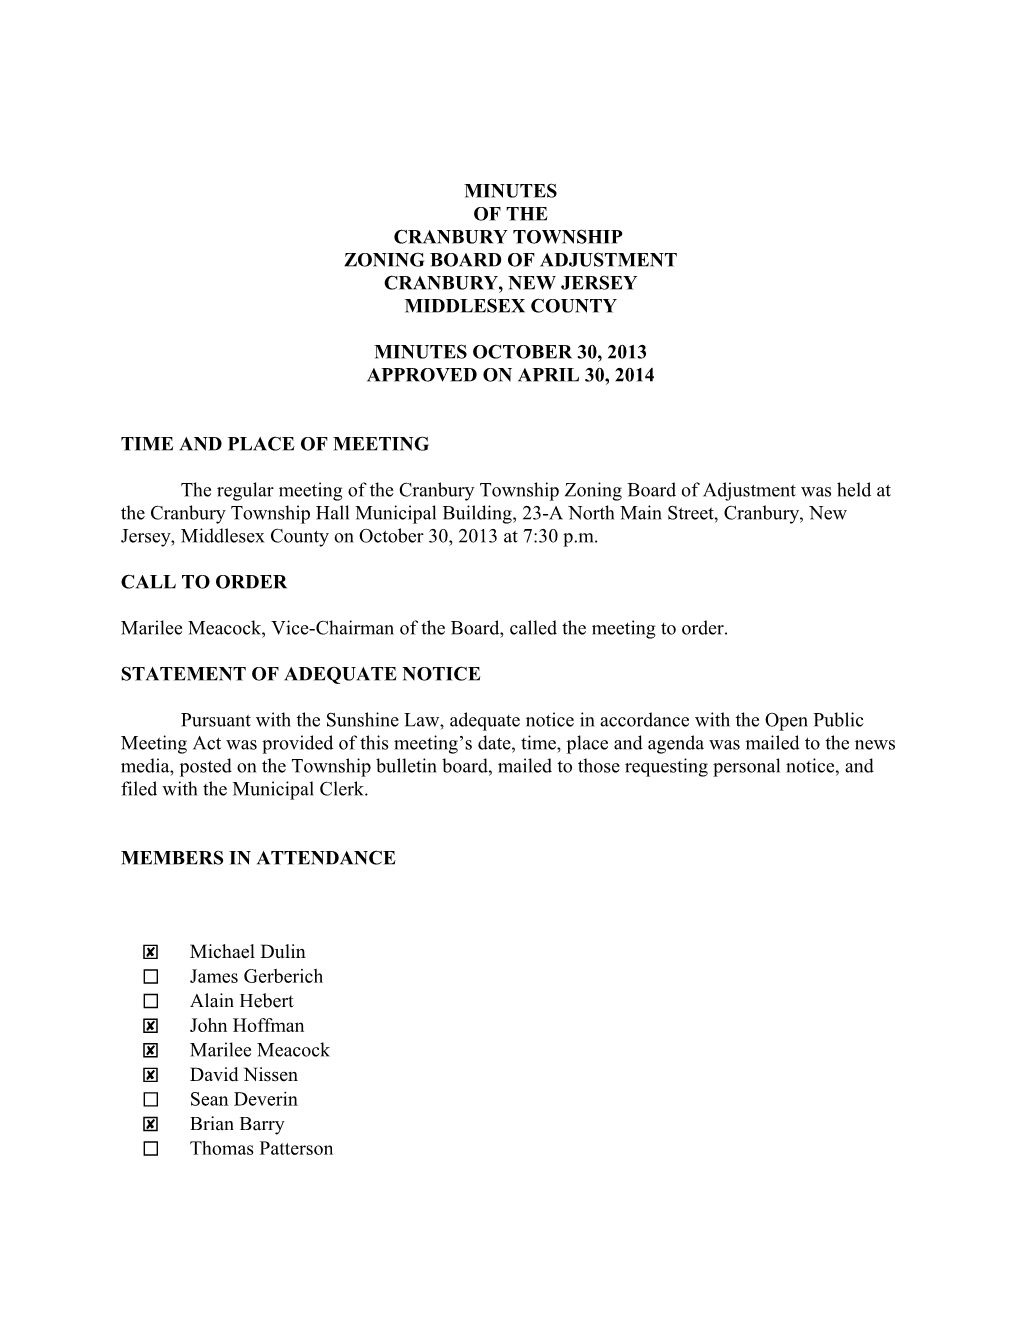 Zoning Board of Adjustment Meeting